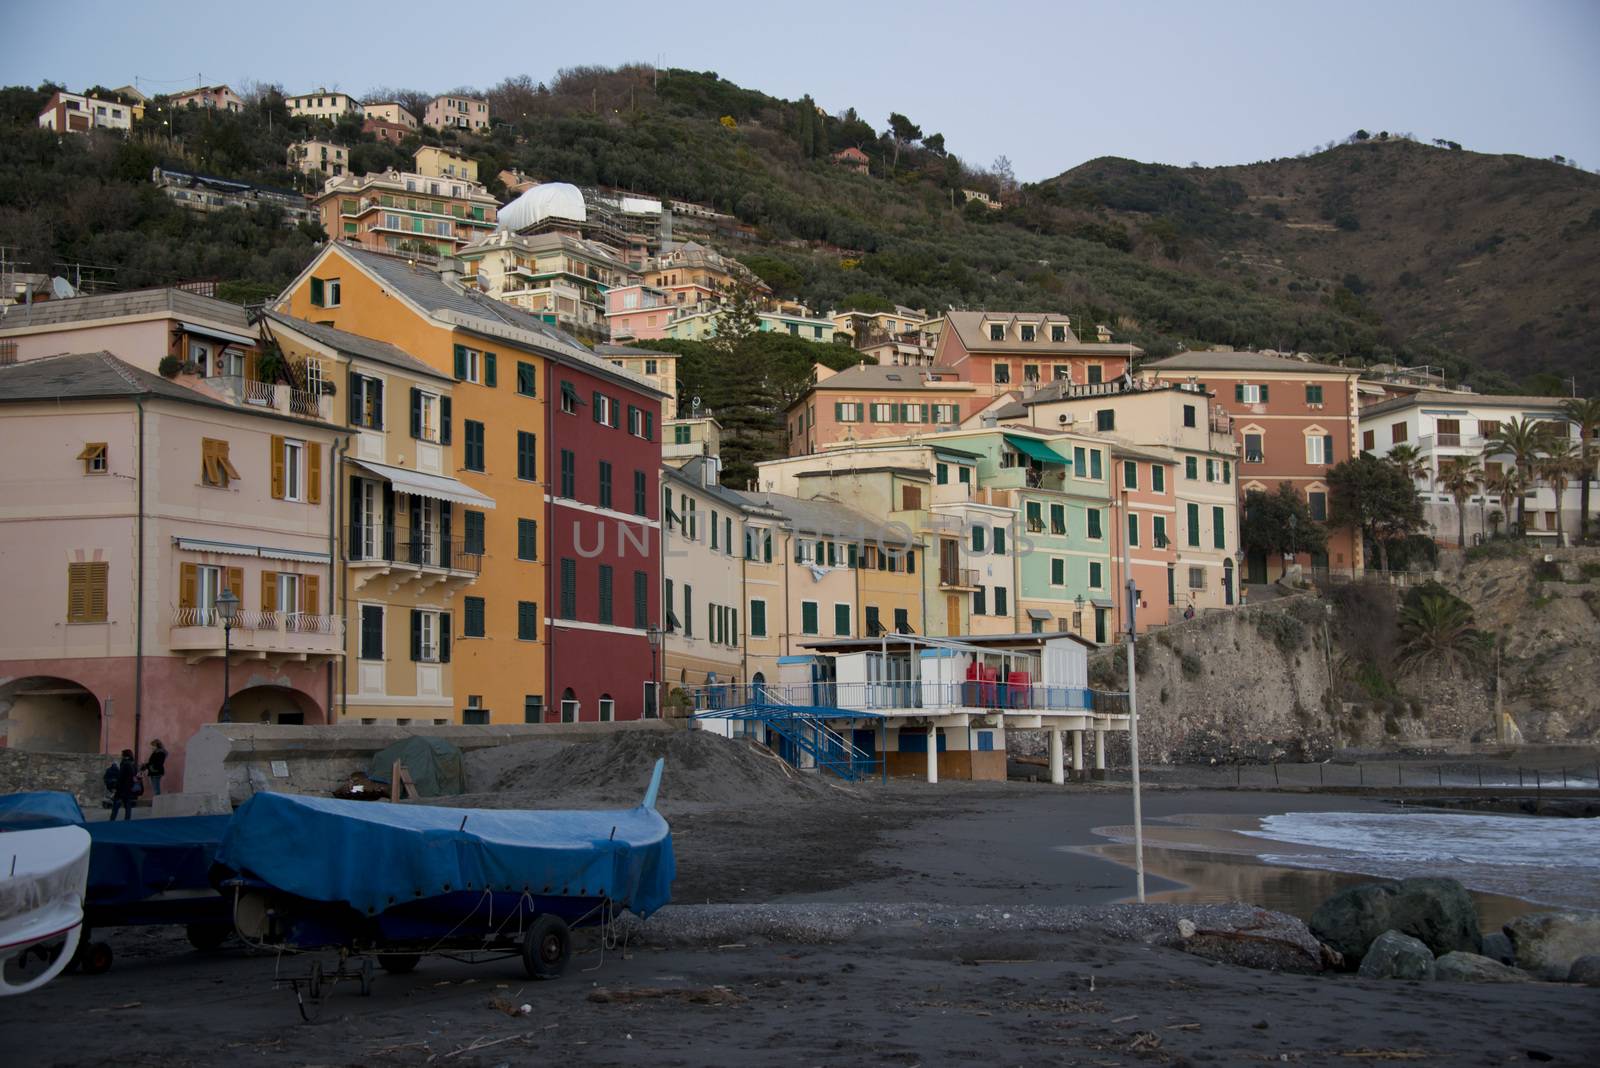 Typical fishing village of Bogliasco on the mediterranean sea. A picturesque town of the italian riviera.